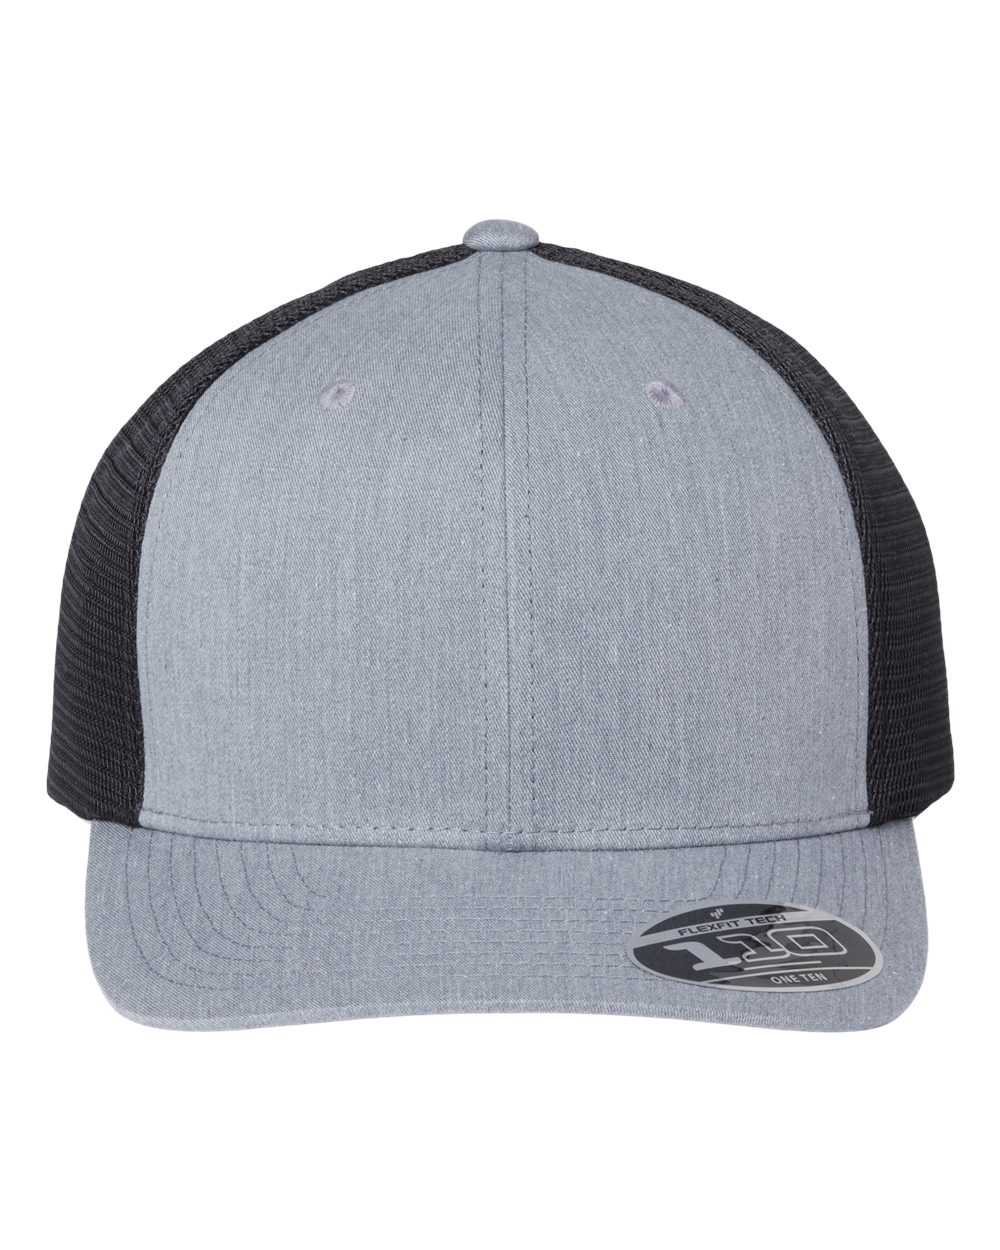 click to view Heather Grey/ Black